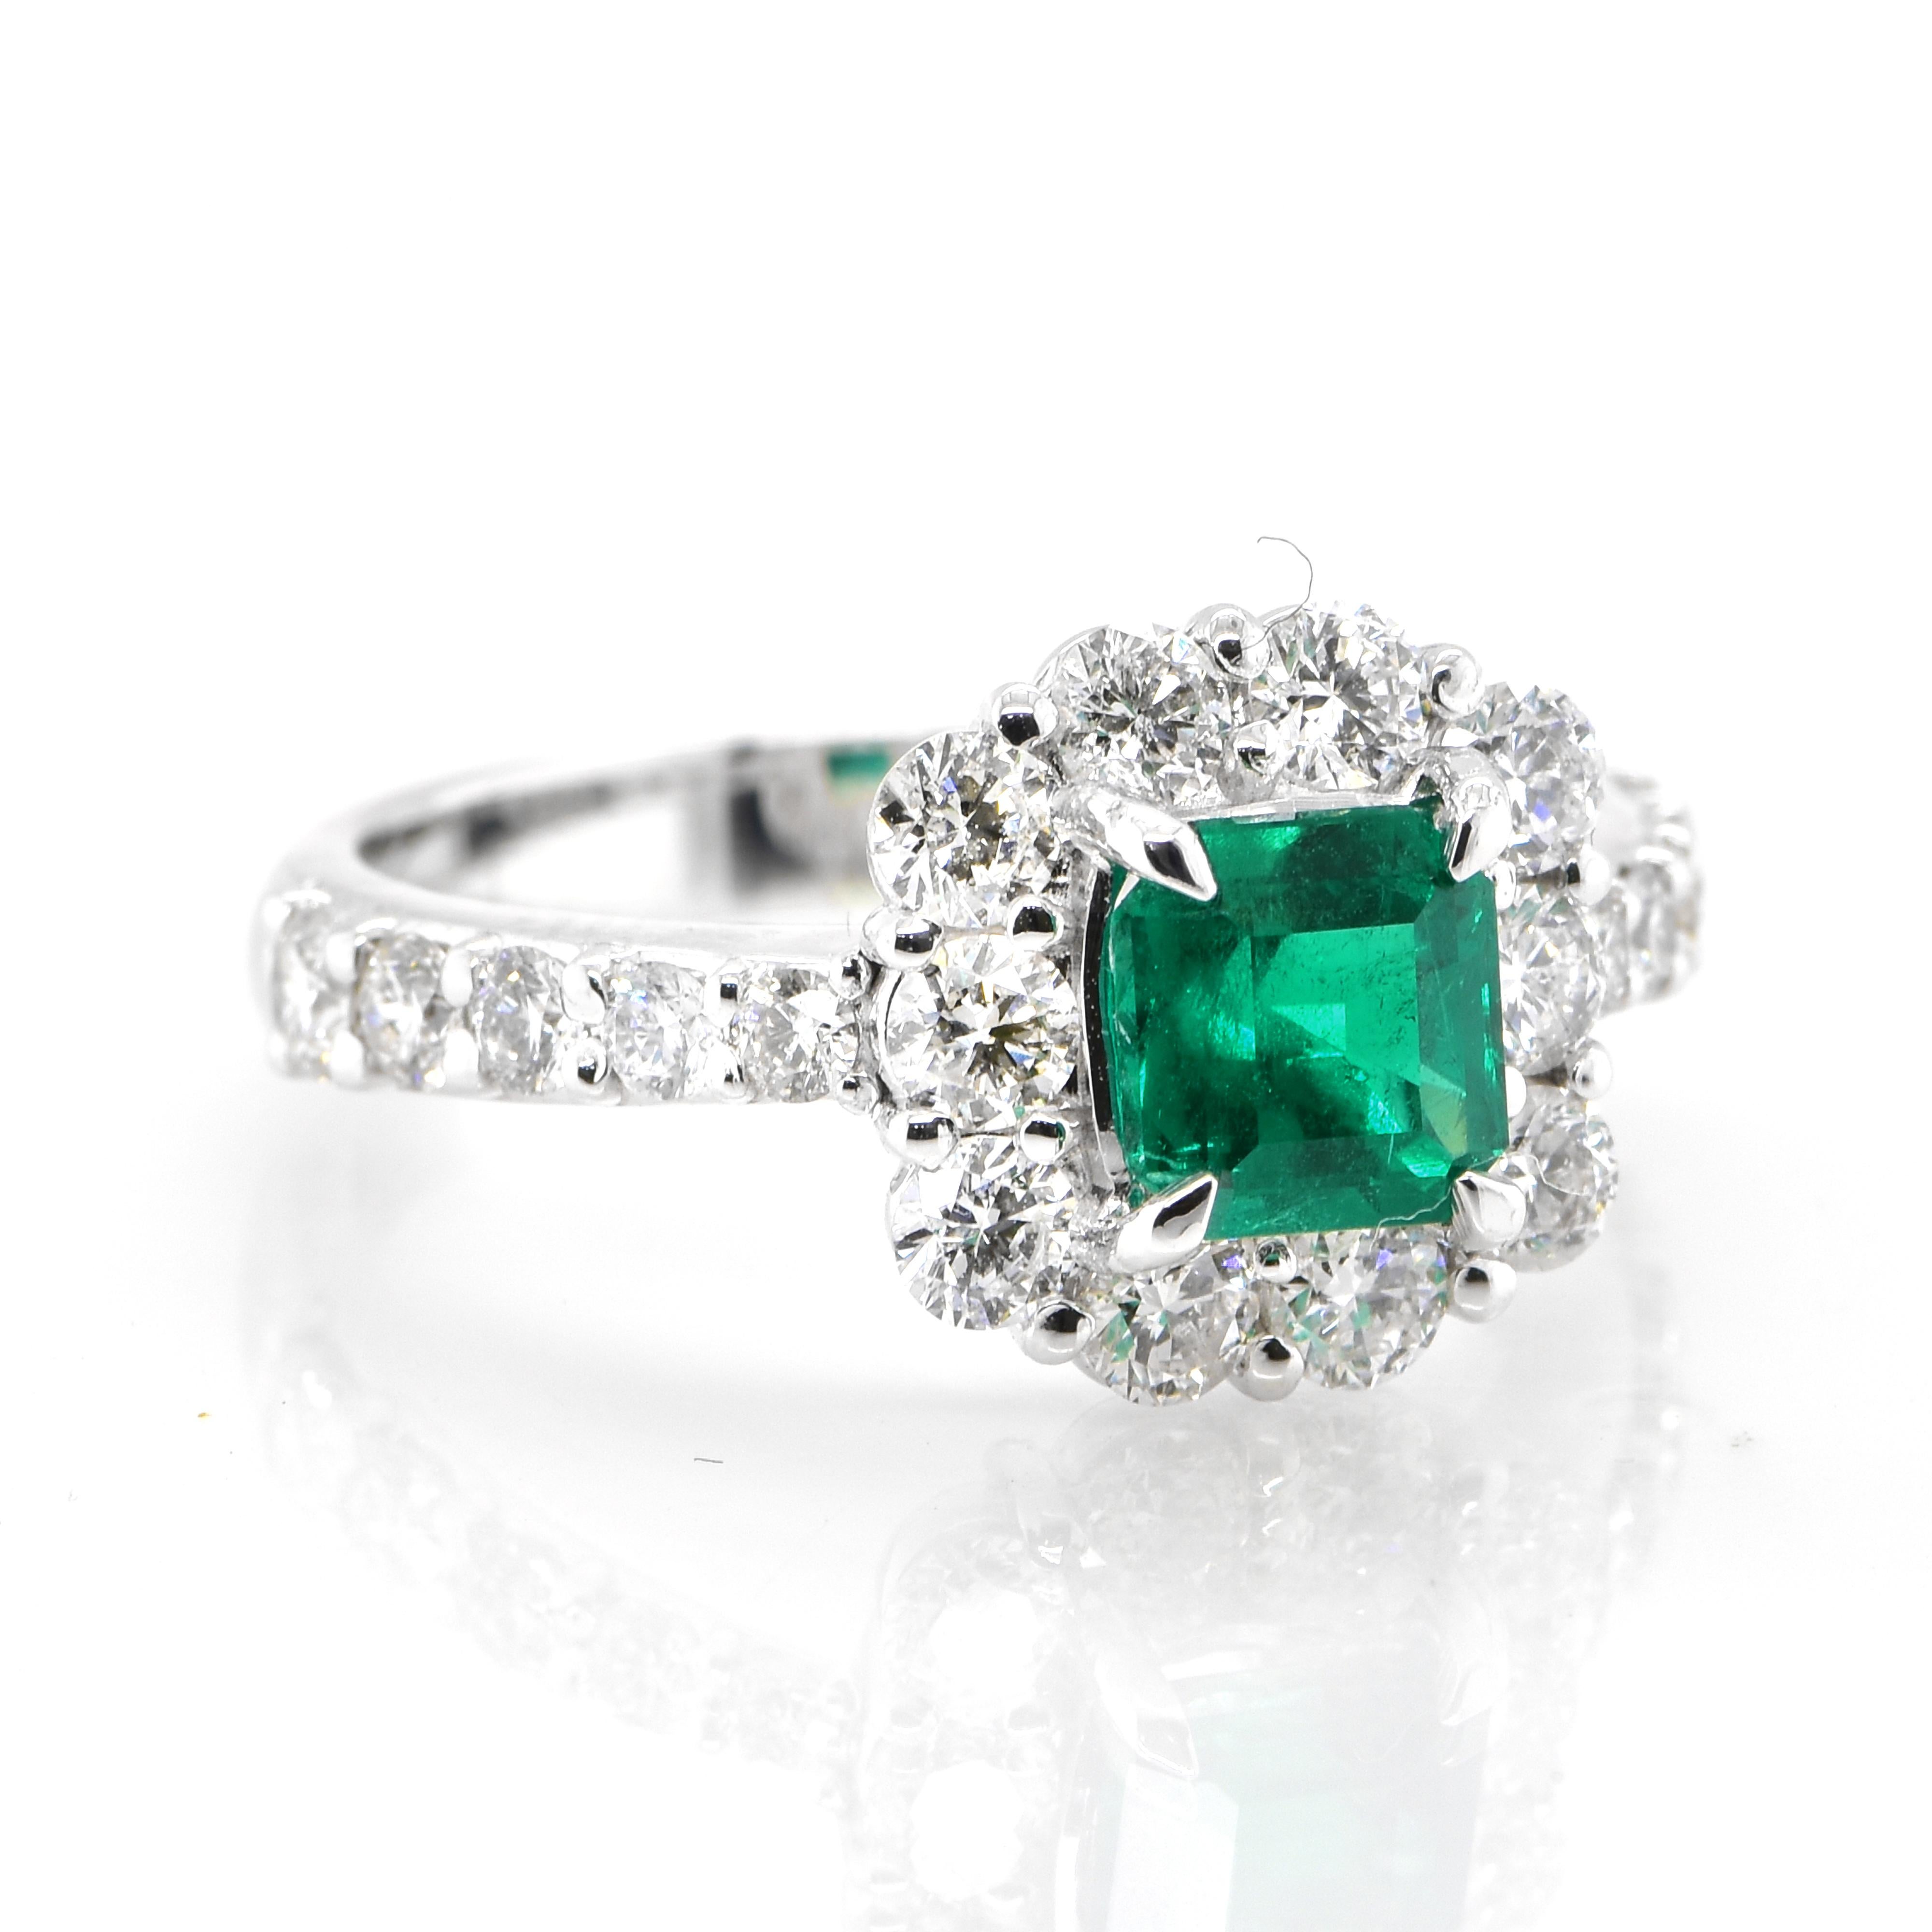 Modern 0.91 Carat Natural Colombian Emerald and Diamond Ring Made in Platinum For Sale